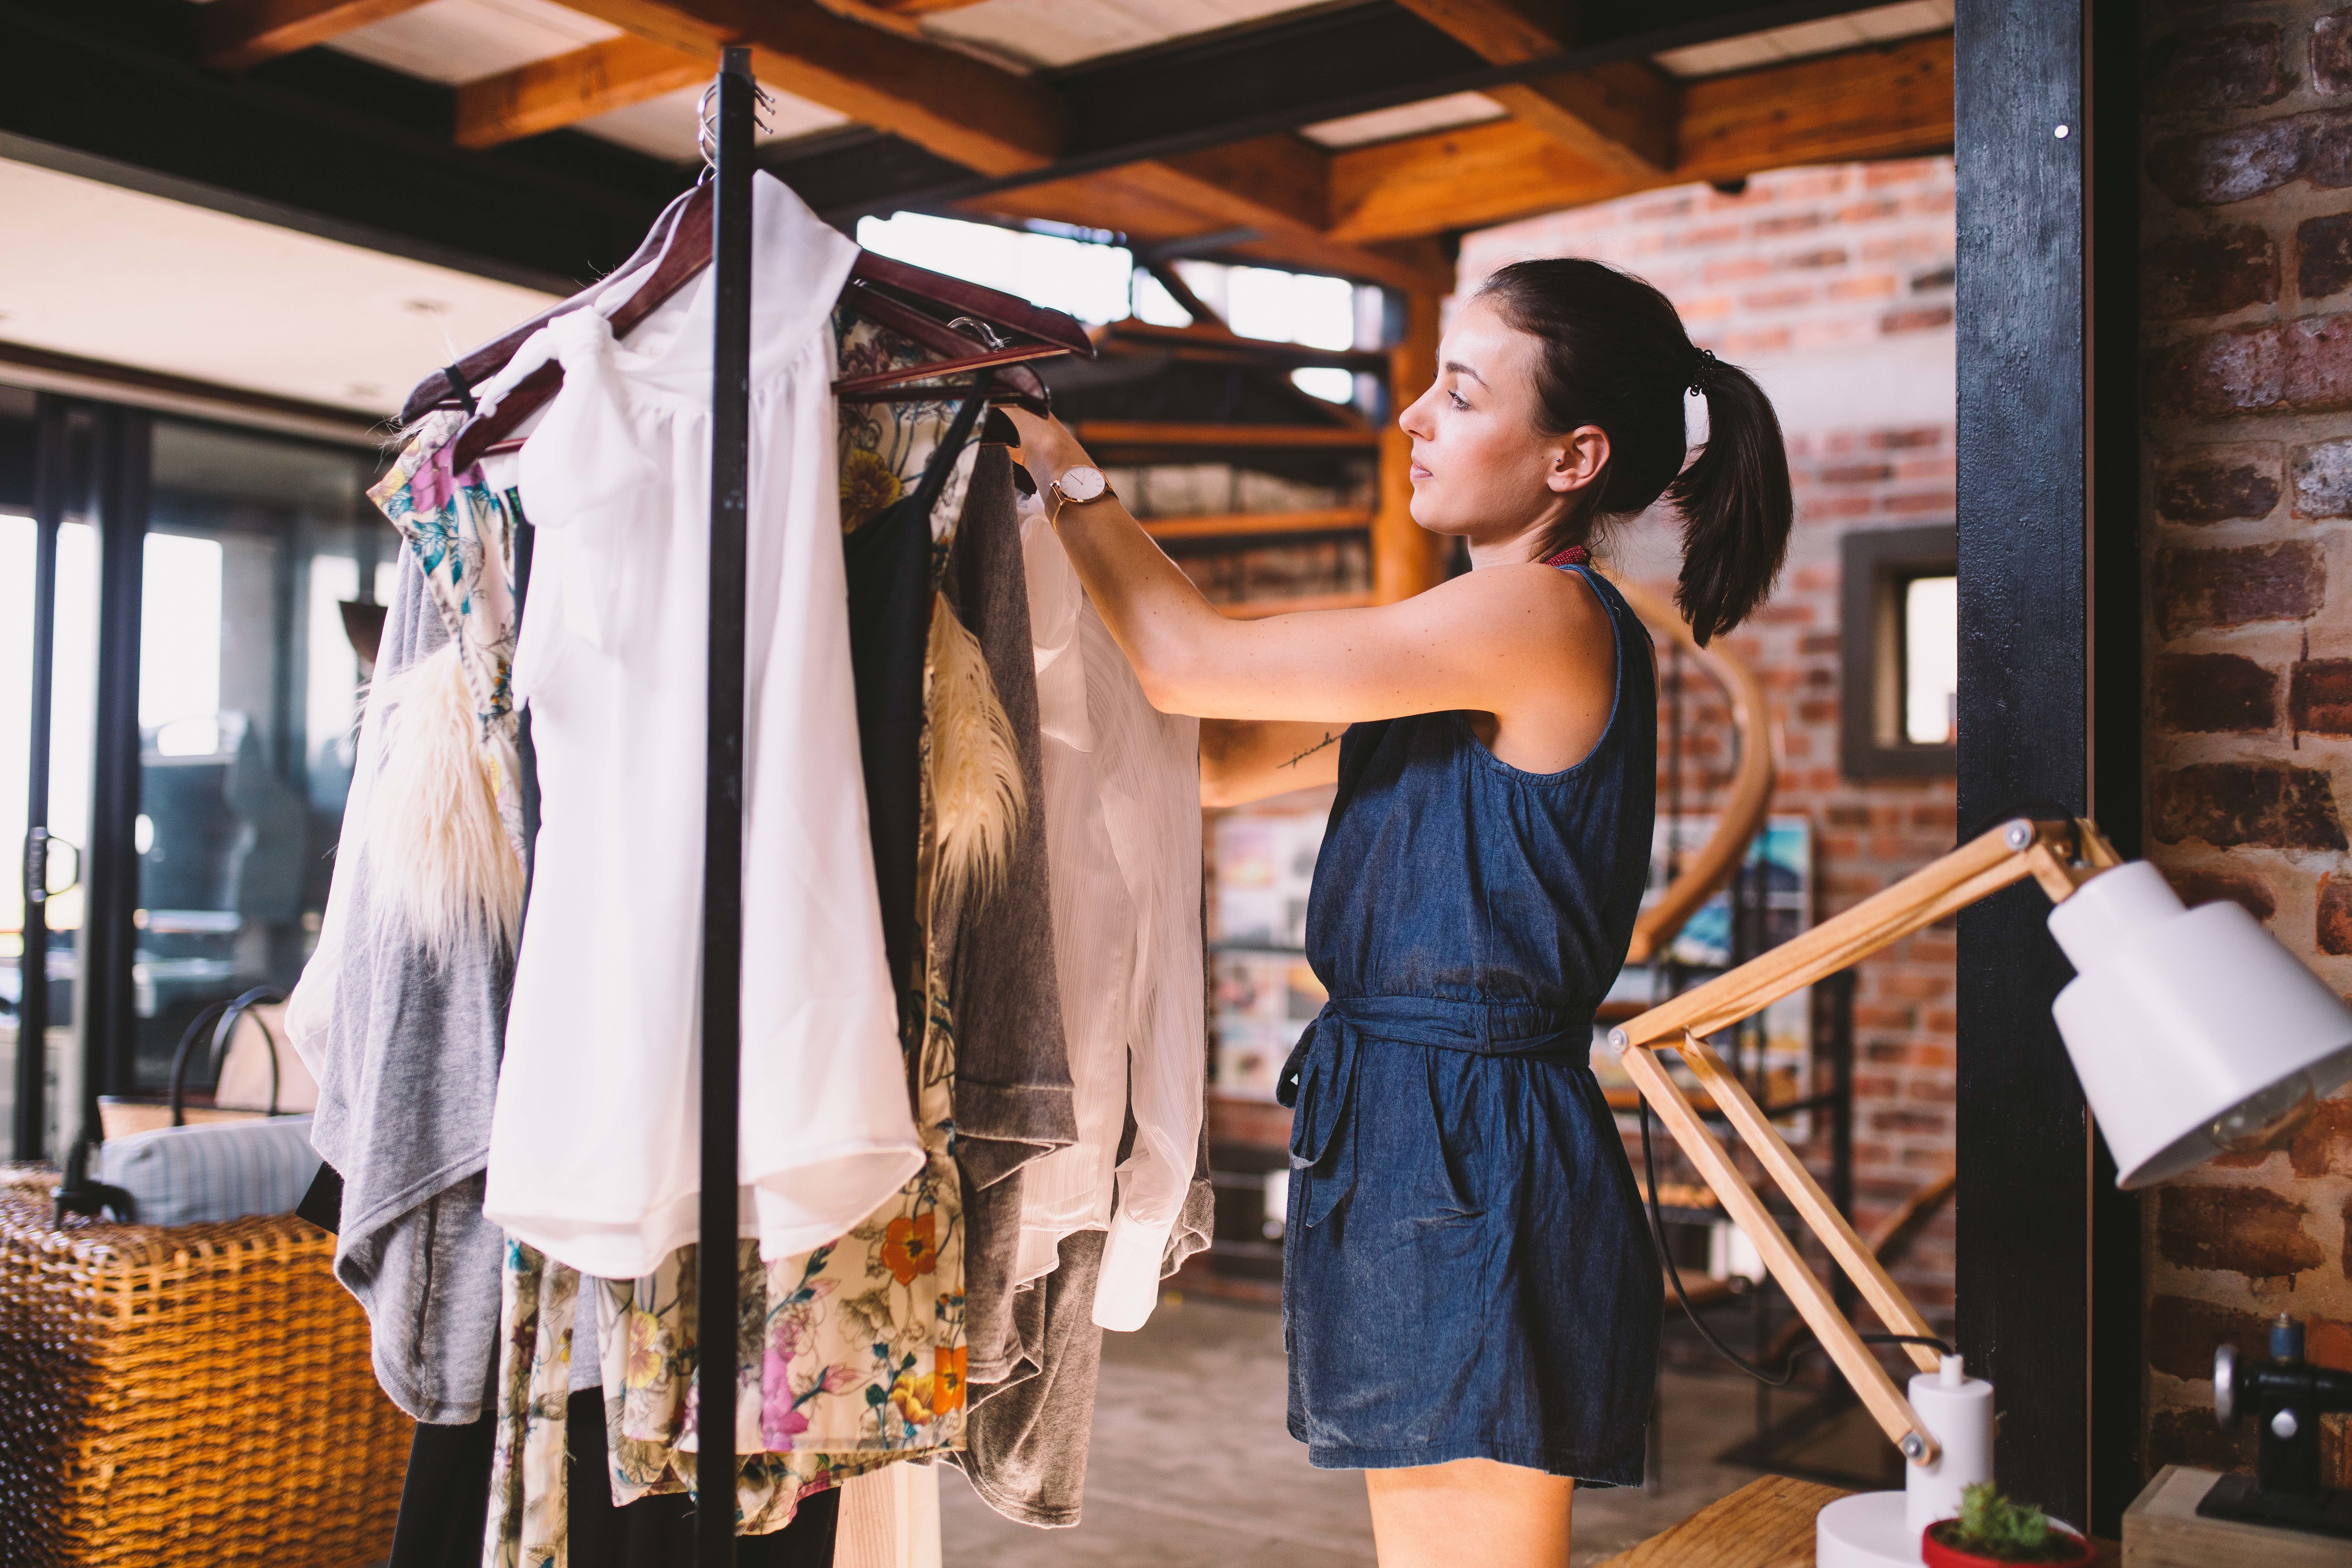 "Startup Shortcuts: How to Test Your Fashion Business Before Launching"